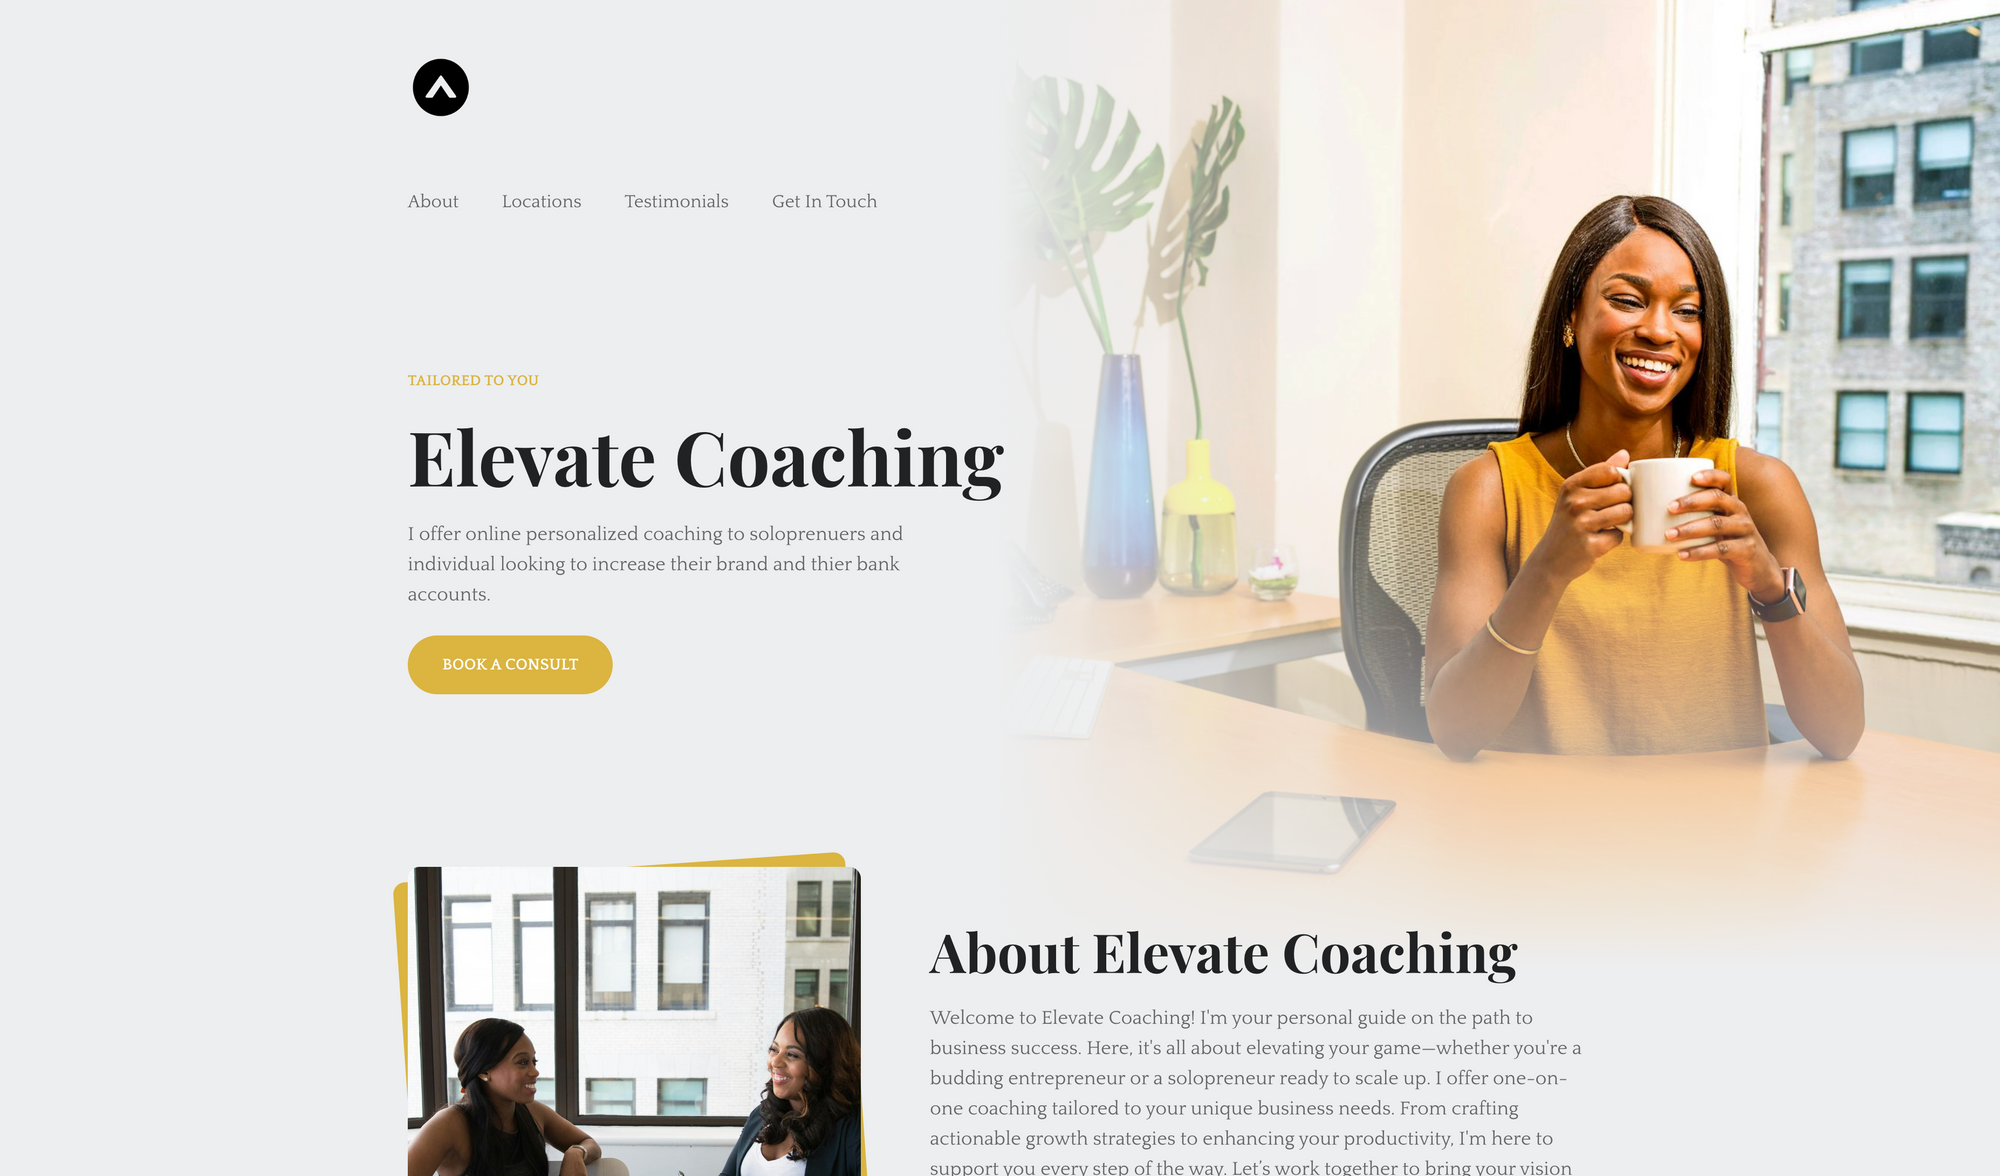 Yellow and Black website theme with black woman sitting at desk on the right